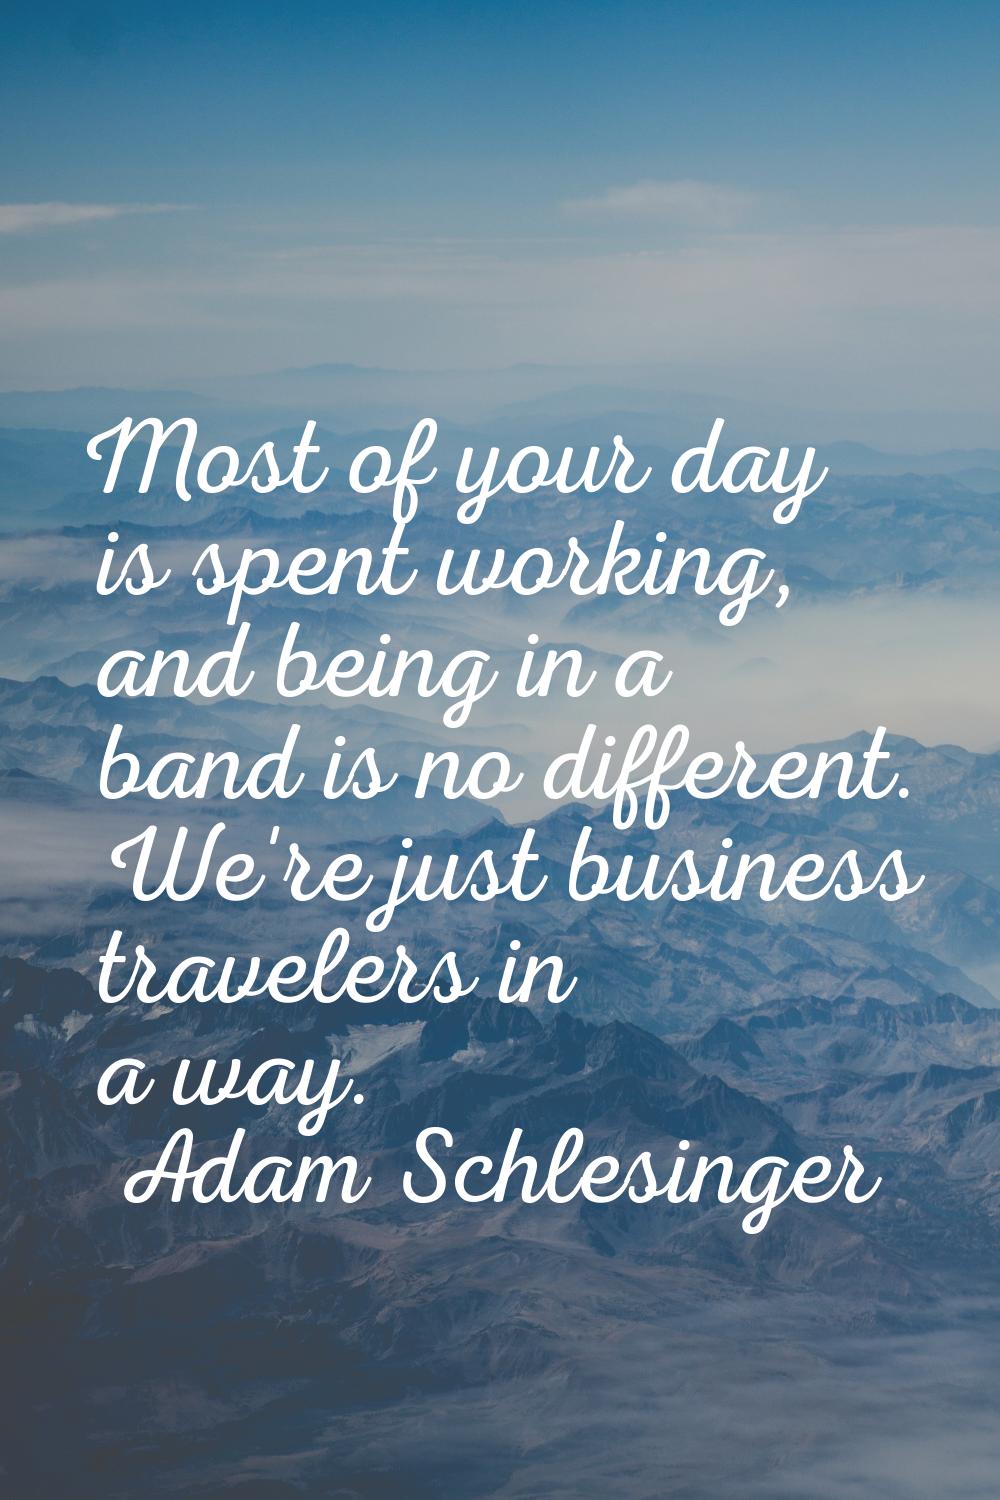 Most of your day is spent working, and being in a band is no different. We're just business travele